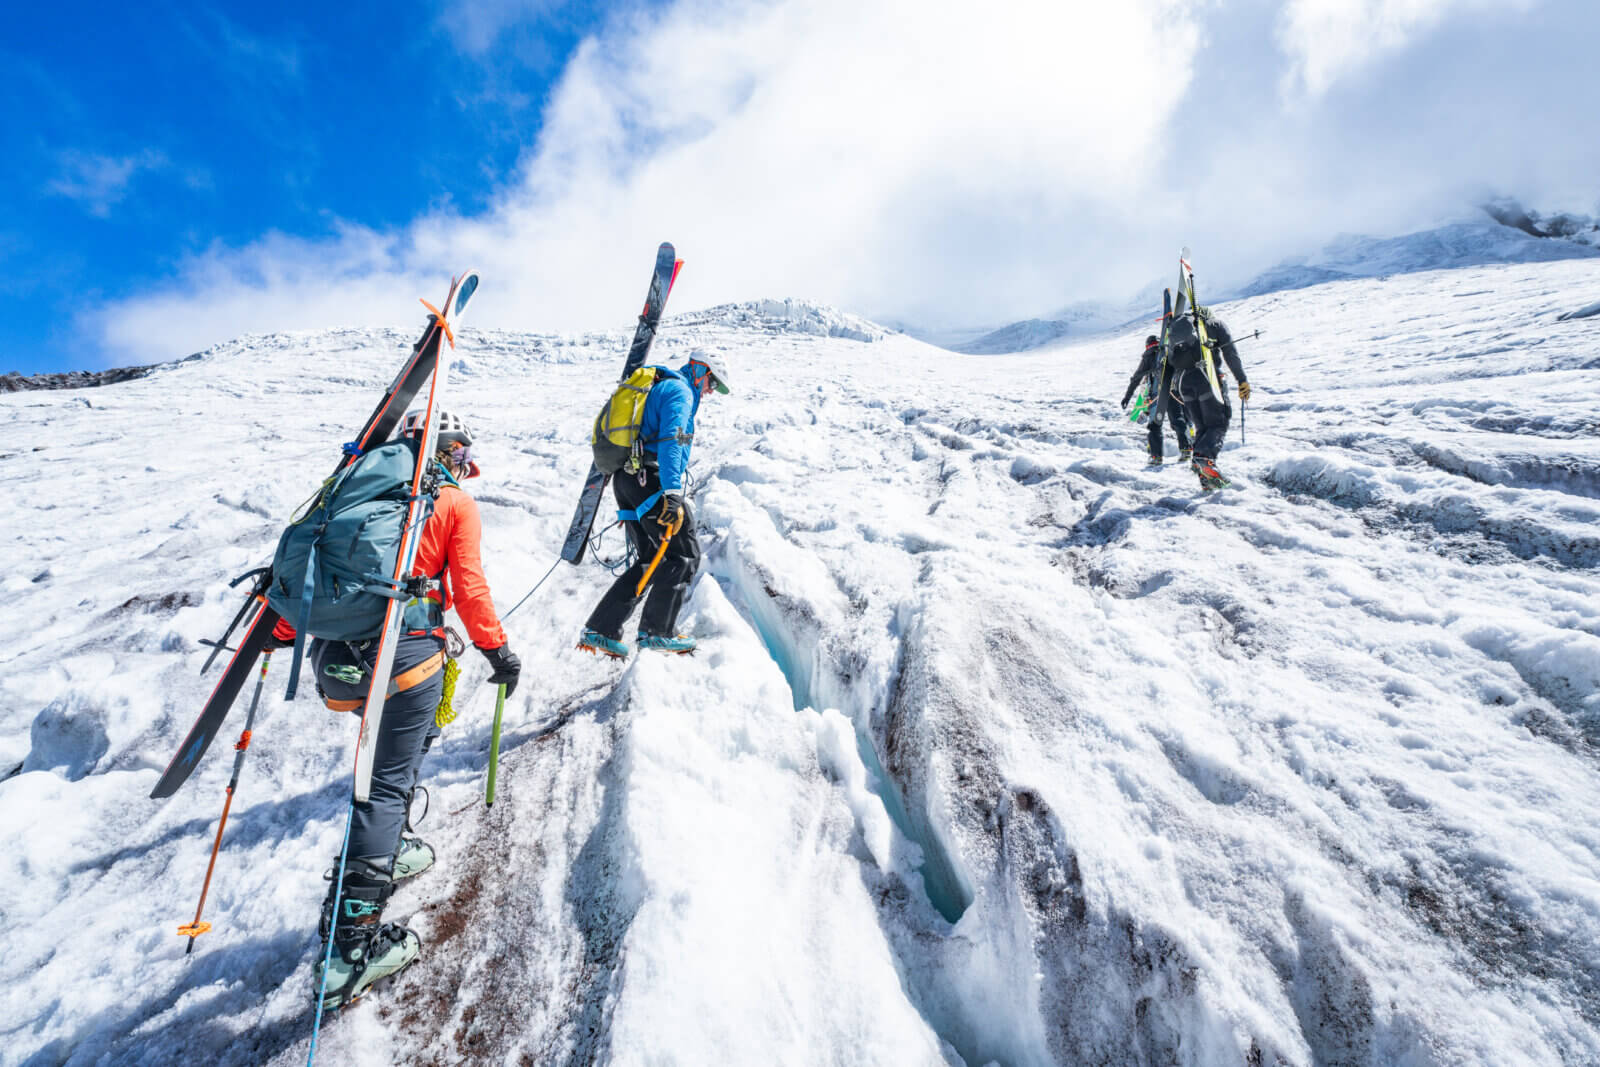 Three skiers step over small crevasses on a glacier beneath a blue cloudy sky during an international backcountry ski expedition with Alpenglow Expeditions..